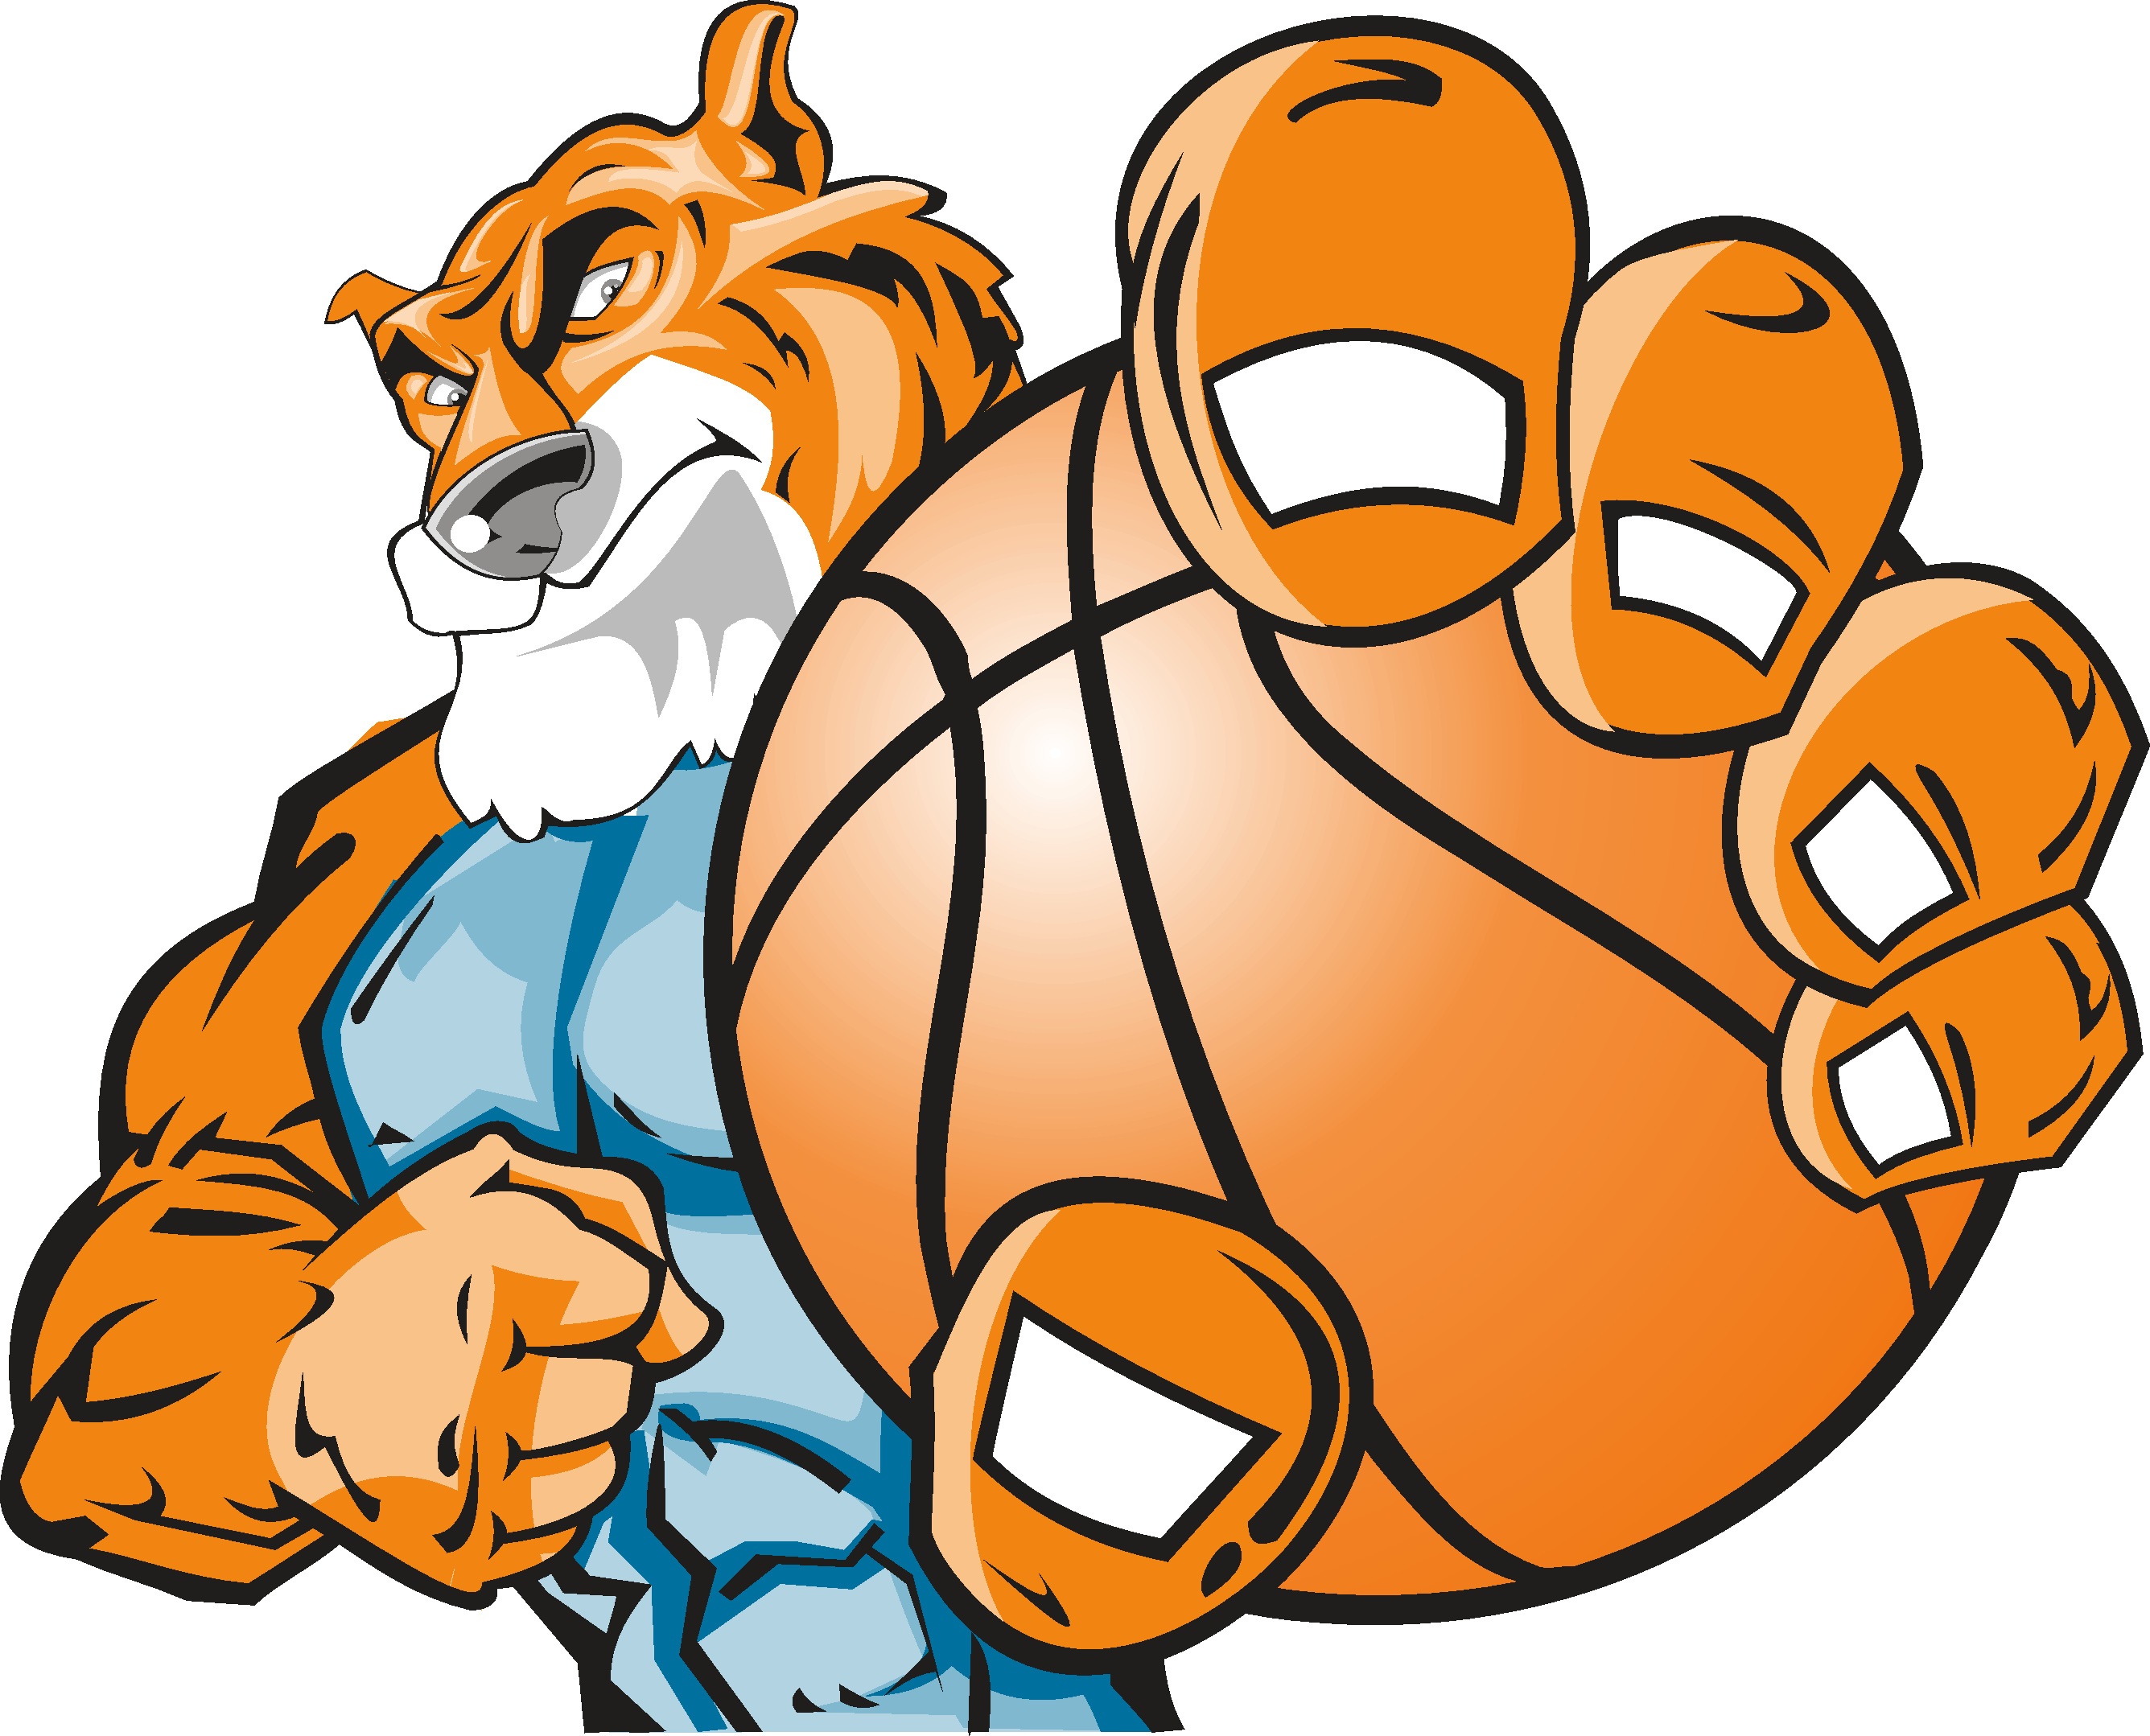 Jpg Lion Free On Dumielauxepices Net - Kangaroo Holding Basketball (2672x2158), Png Download